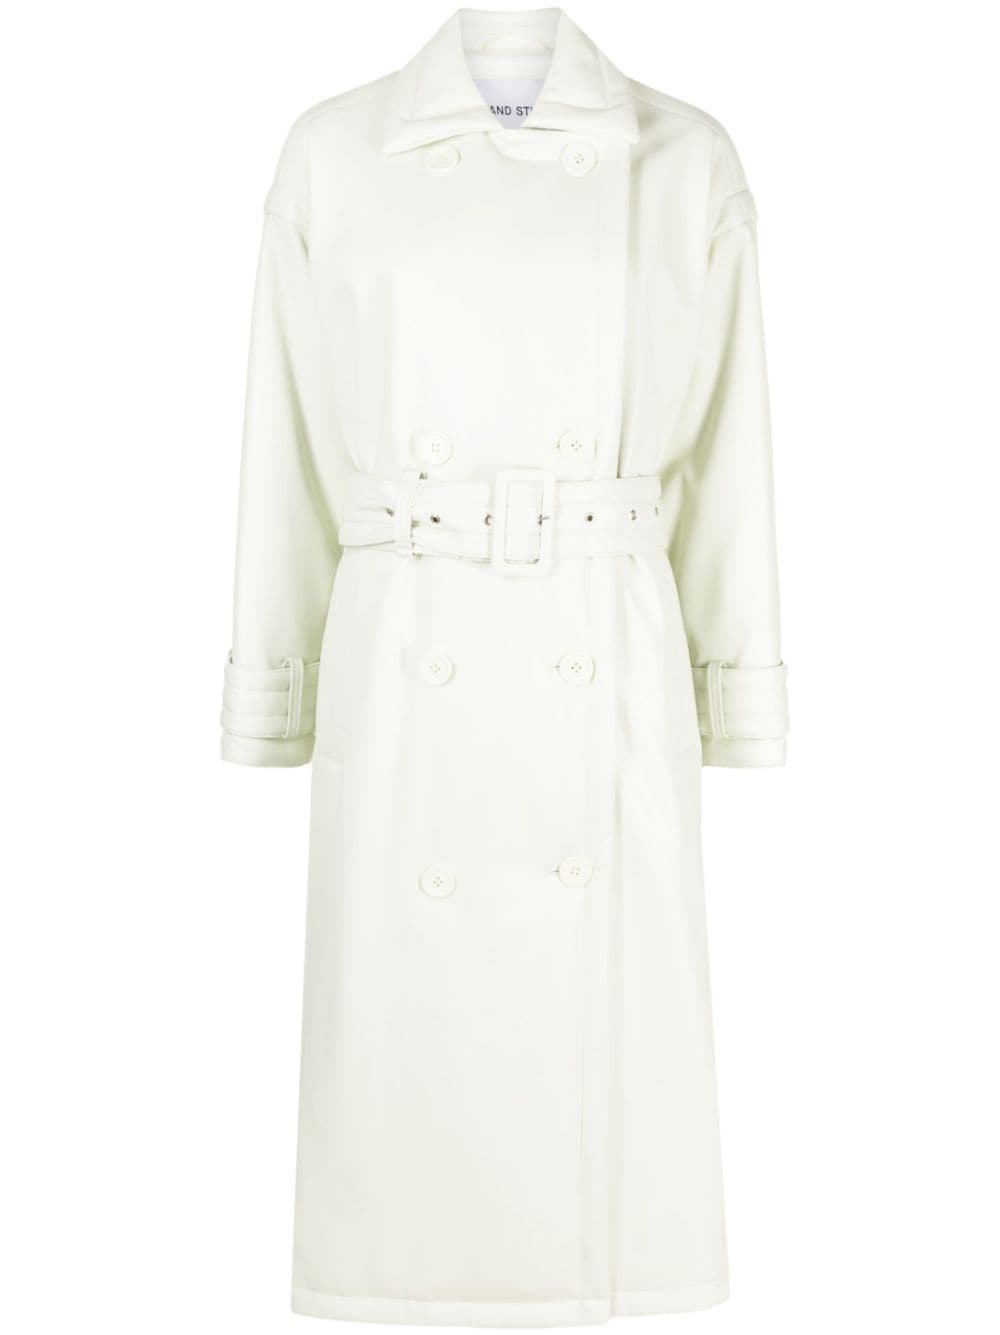 STAND STUDIO Emily double-breasted belted trench coat - Green von STAND STUDIO